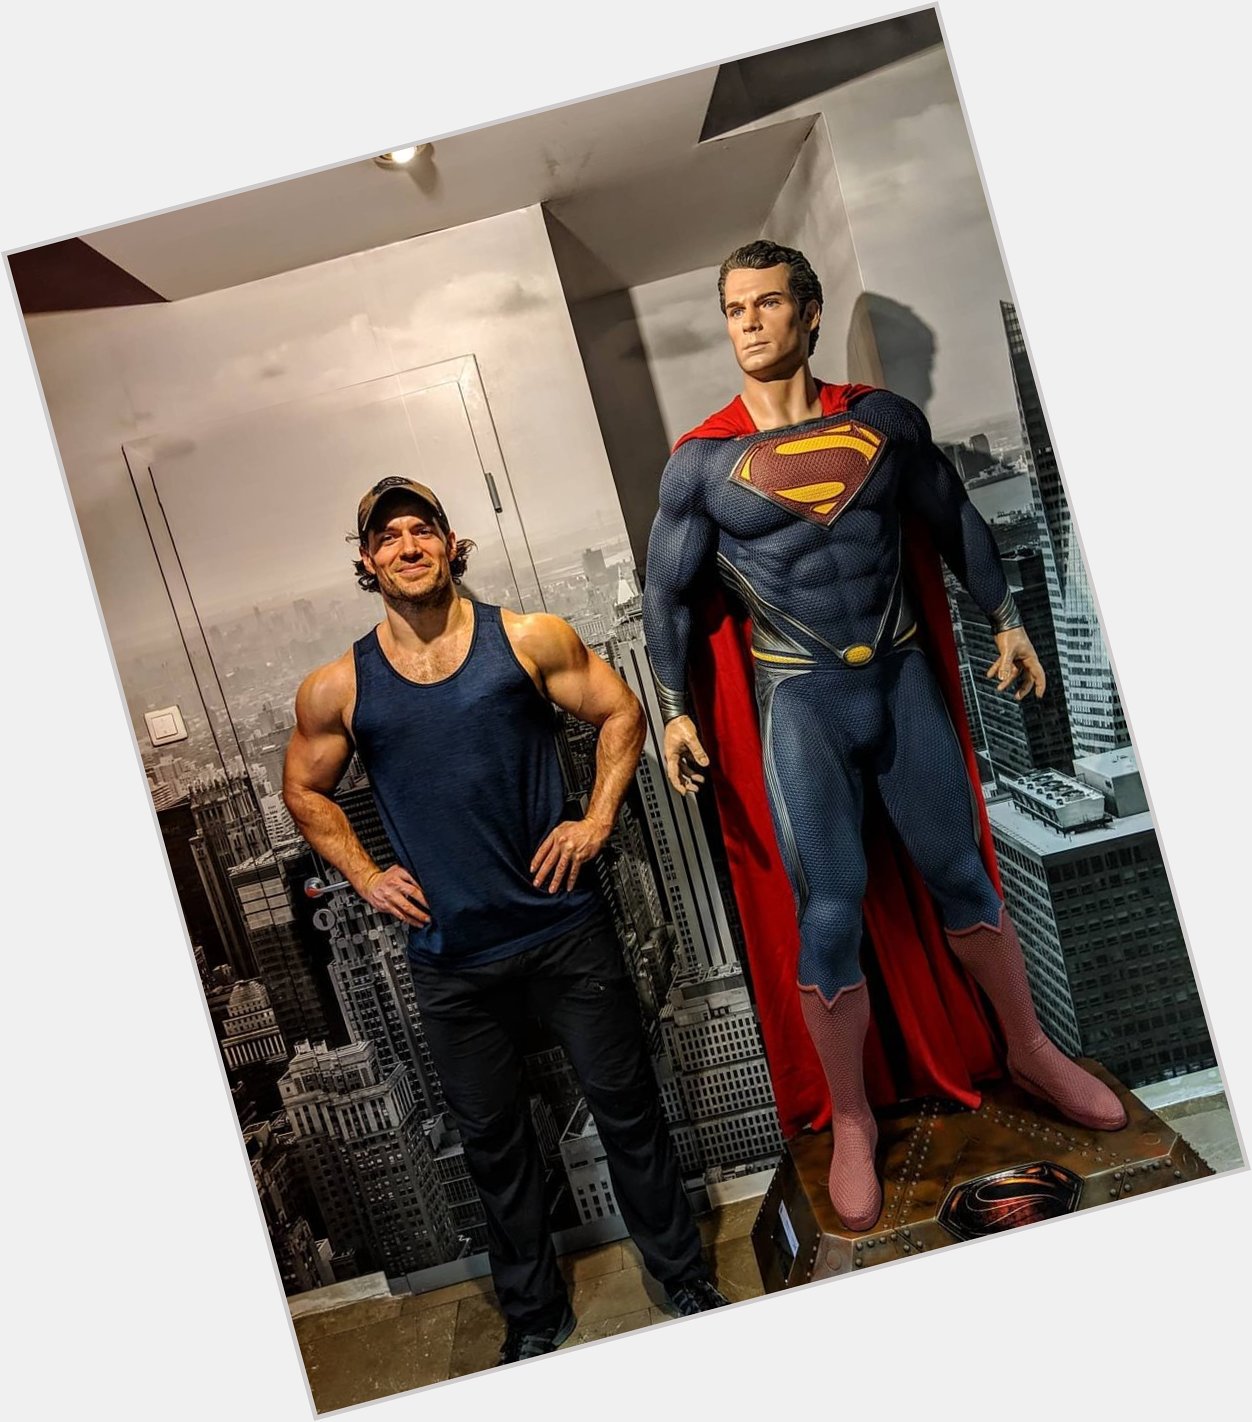 Wishing a very Happy Birthday to the one and only Henry Cavill !!       